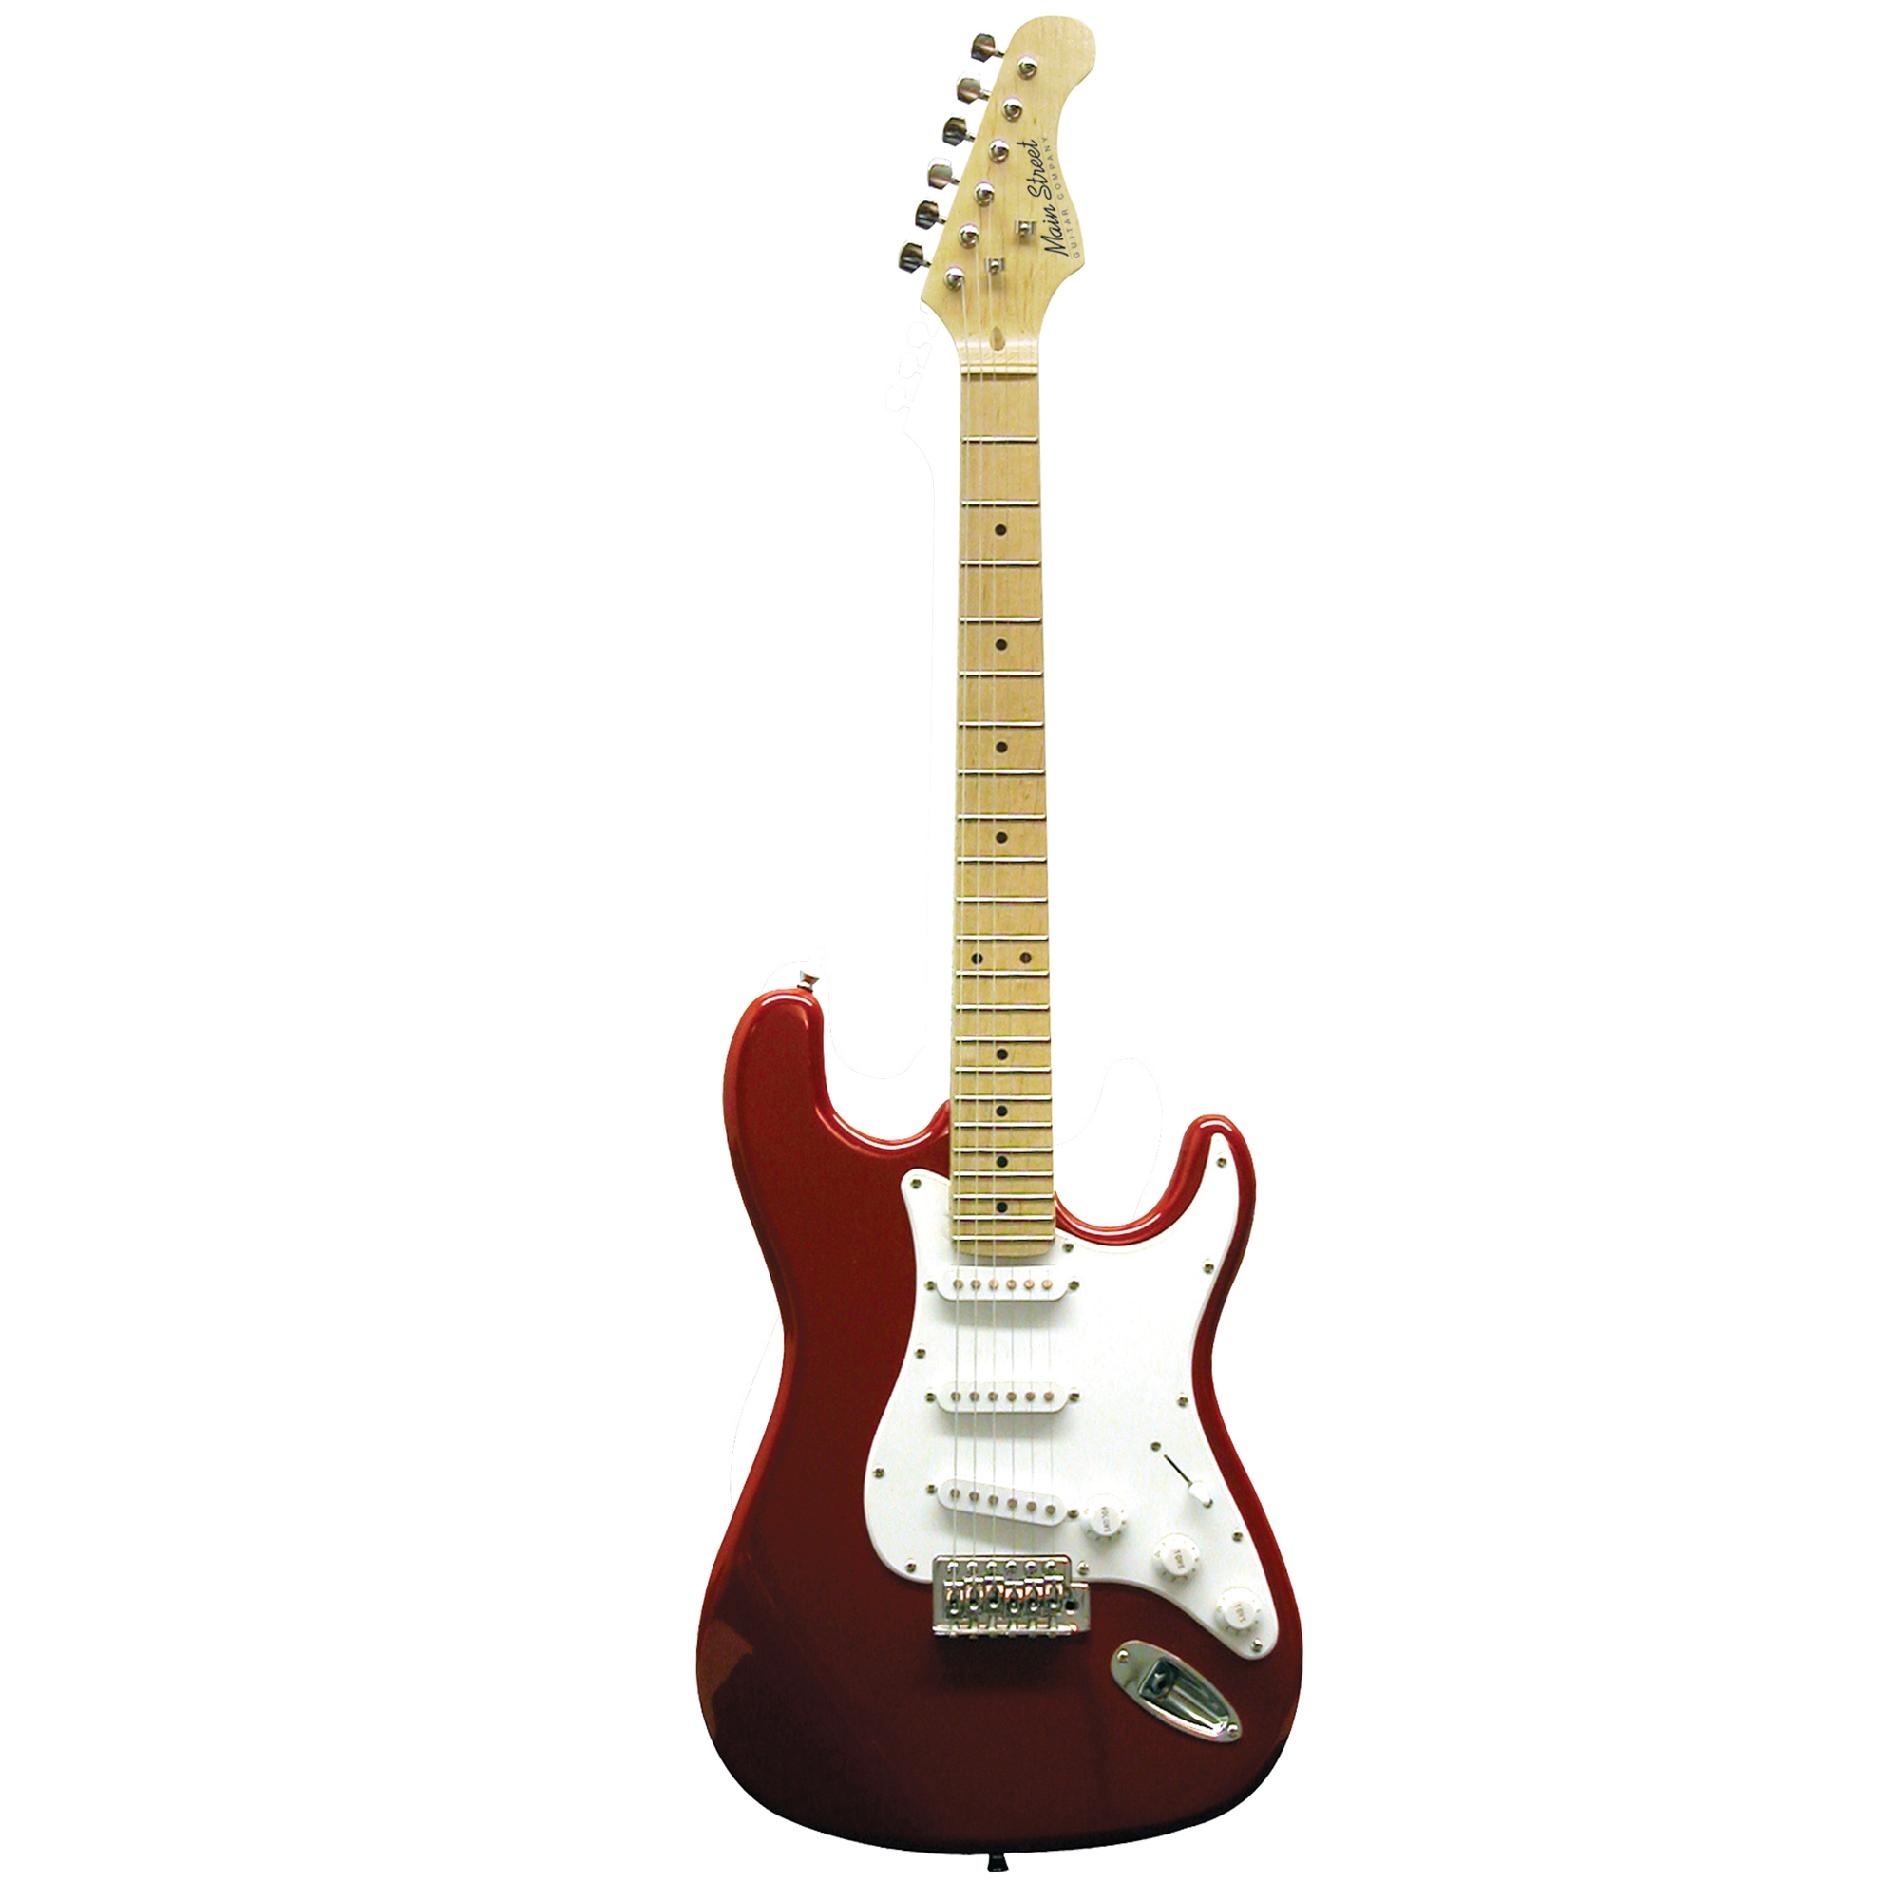 Main Street Double Cutaway Electric Guitar with Red Laminated body